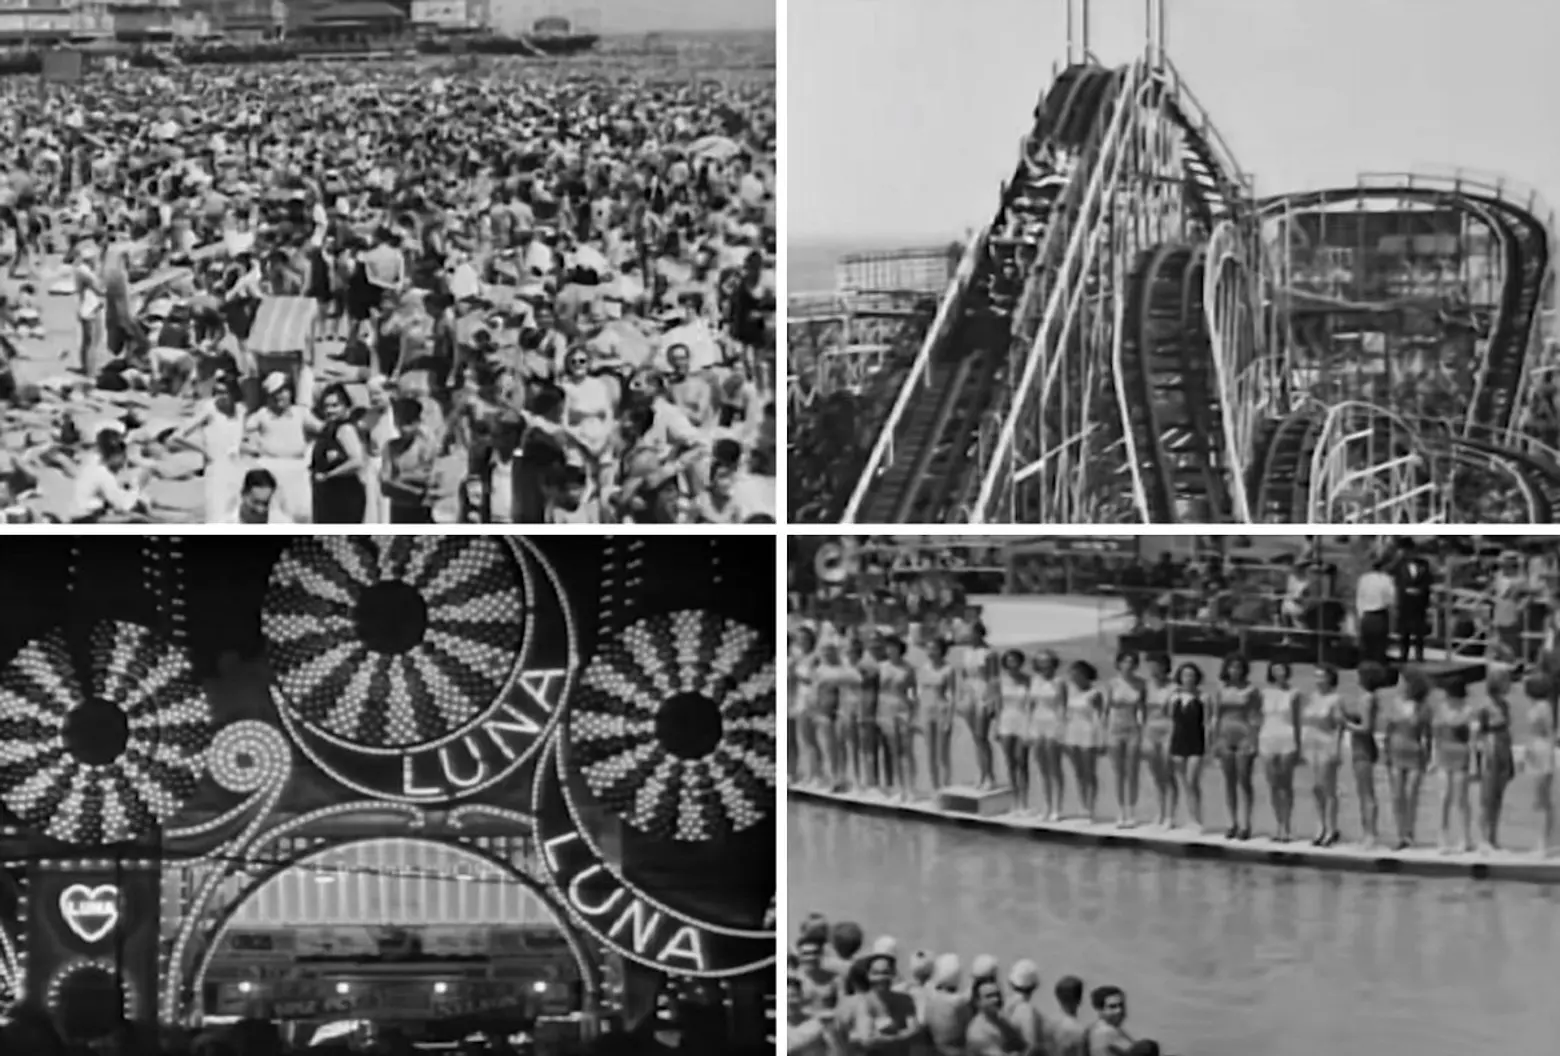 VIDEO: Travel Back to Coney Island’s Summer Heyday in the 1940s